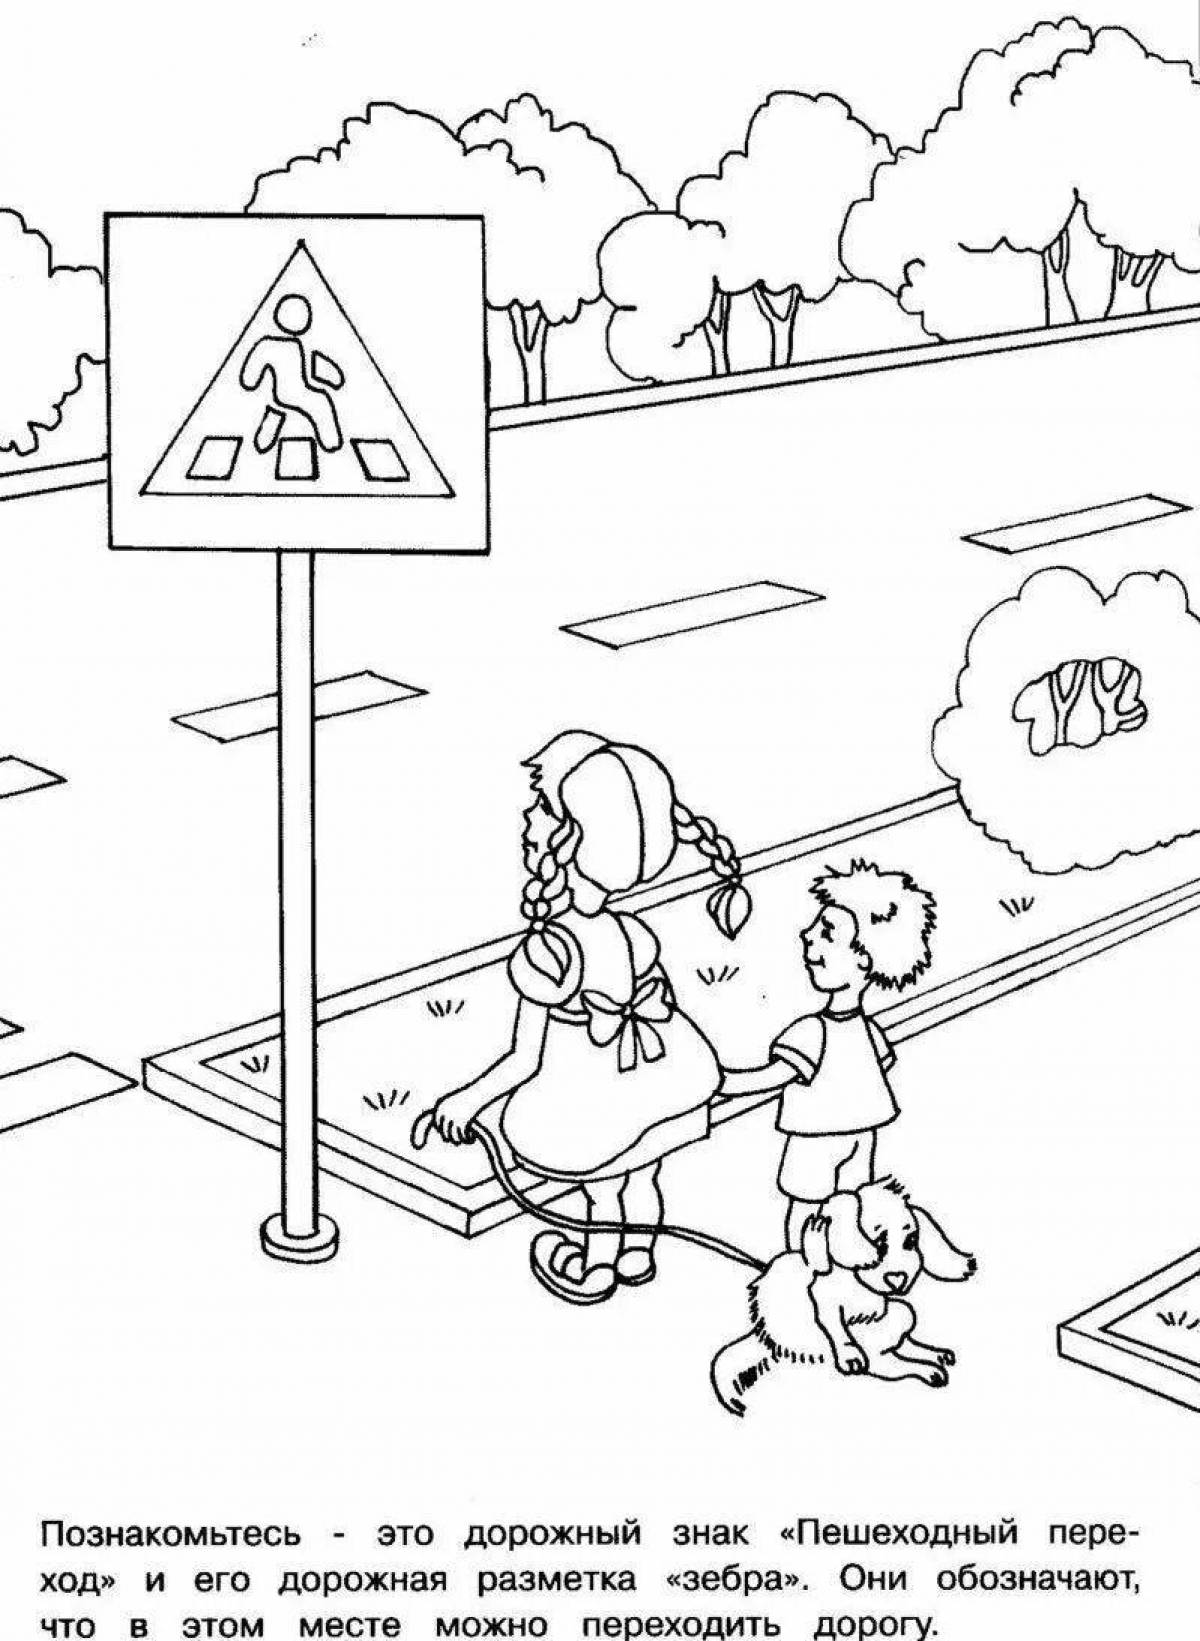 Colorful pedestrian coloring page